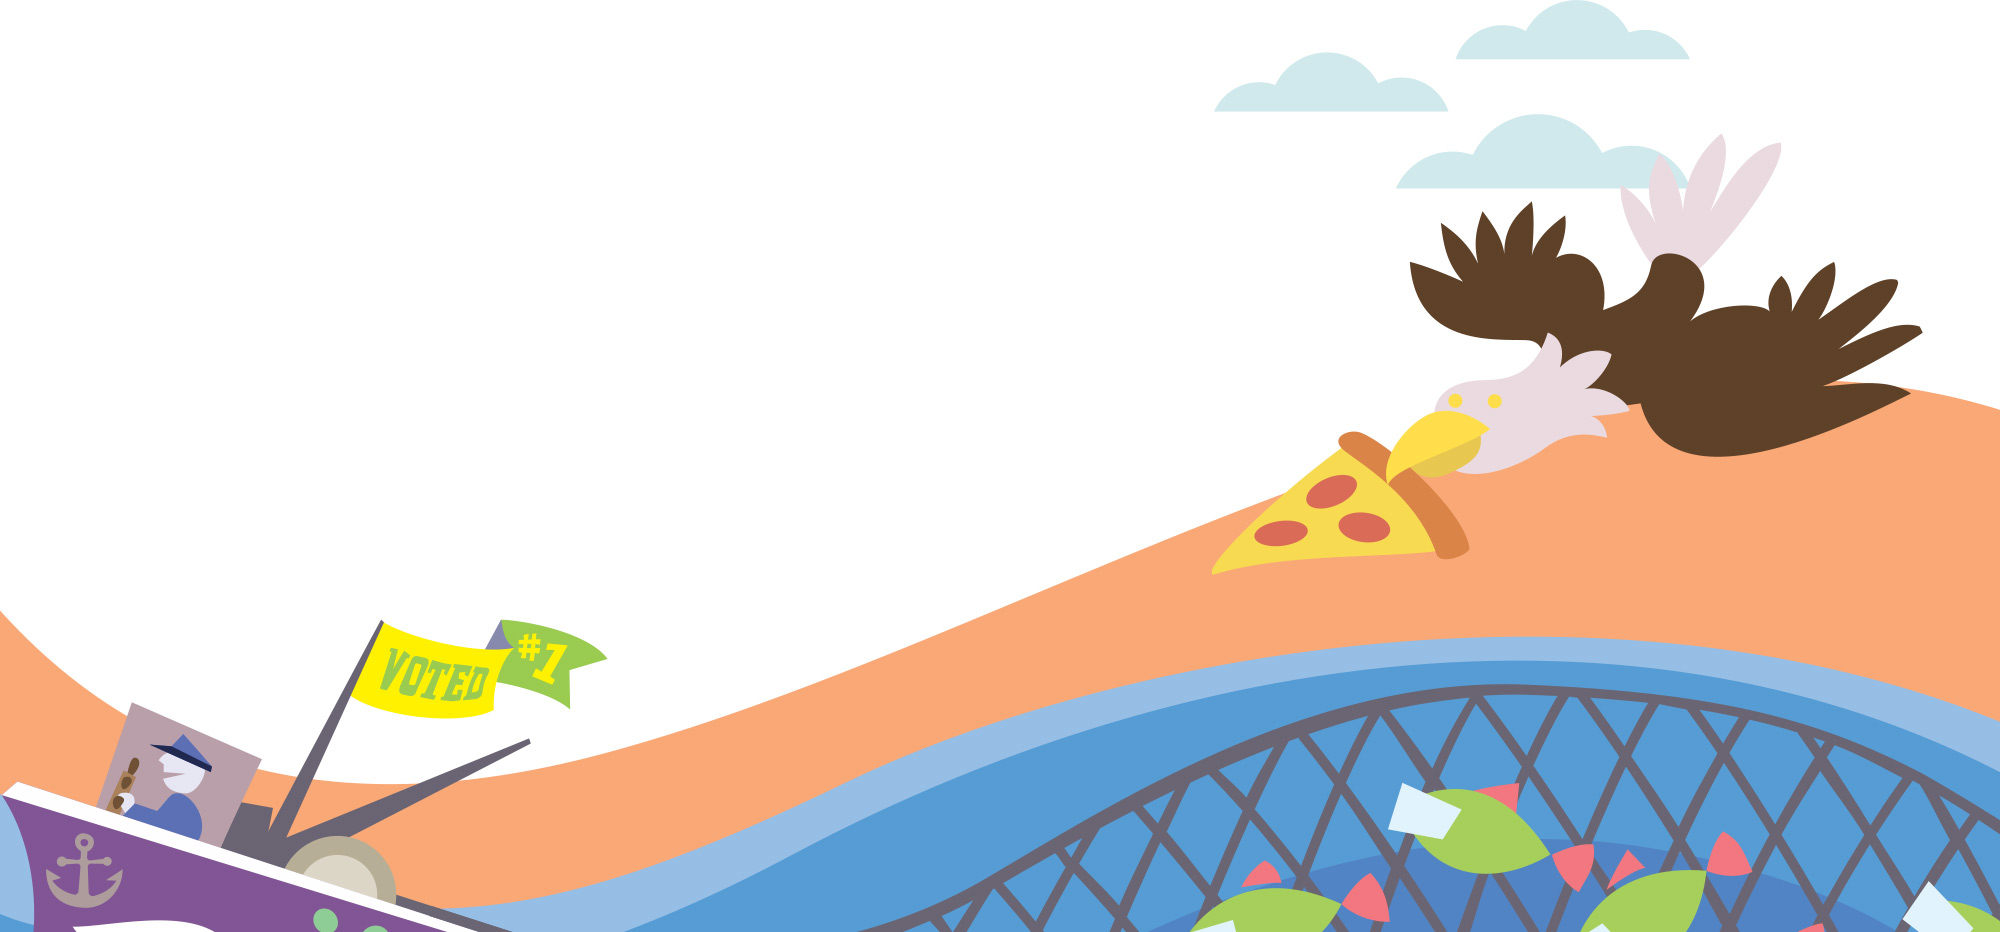 digital illustration of a bird flying with a piece of pizza in its mouth and a boat with a 'Voted #1' flag